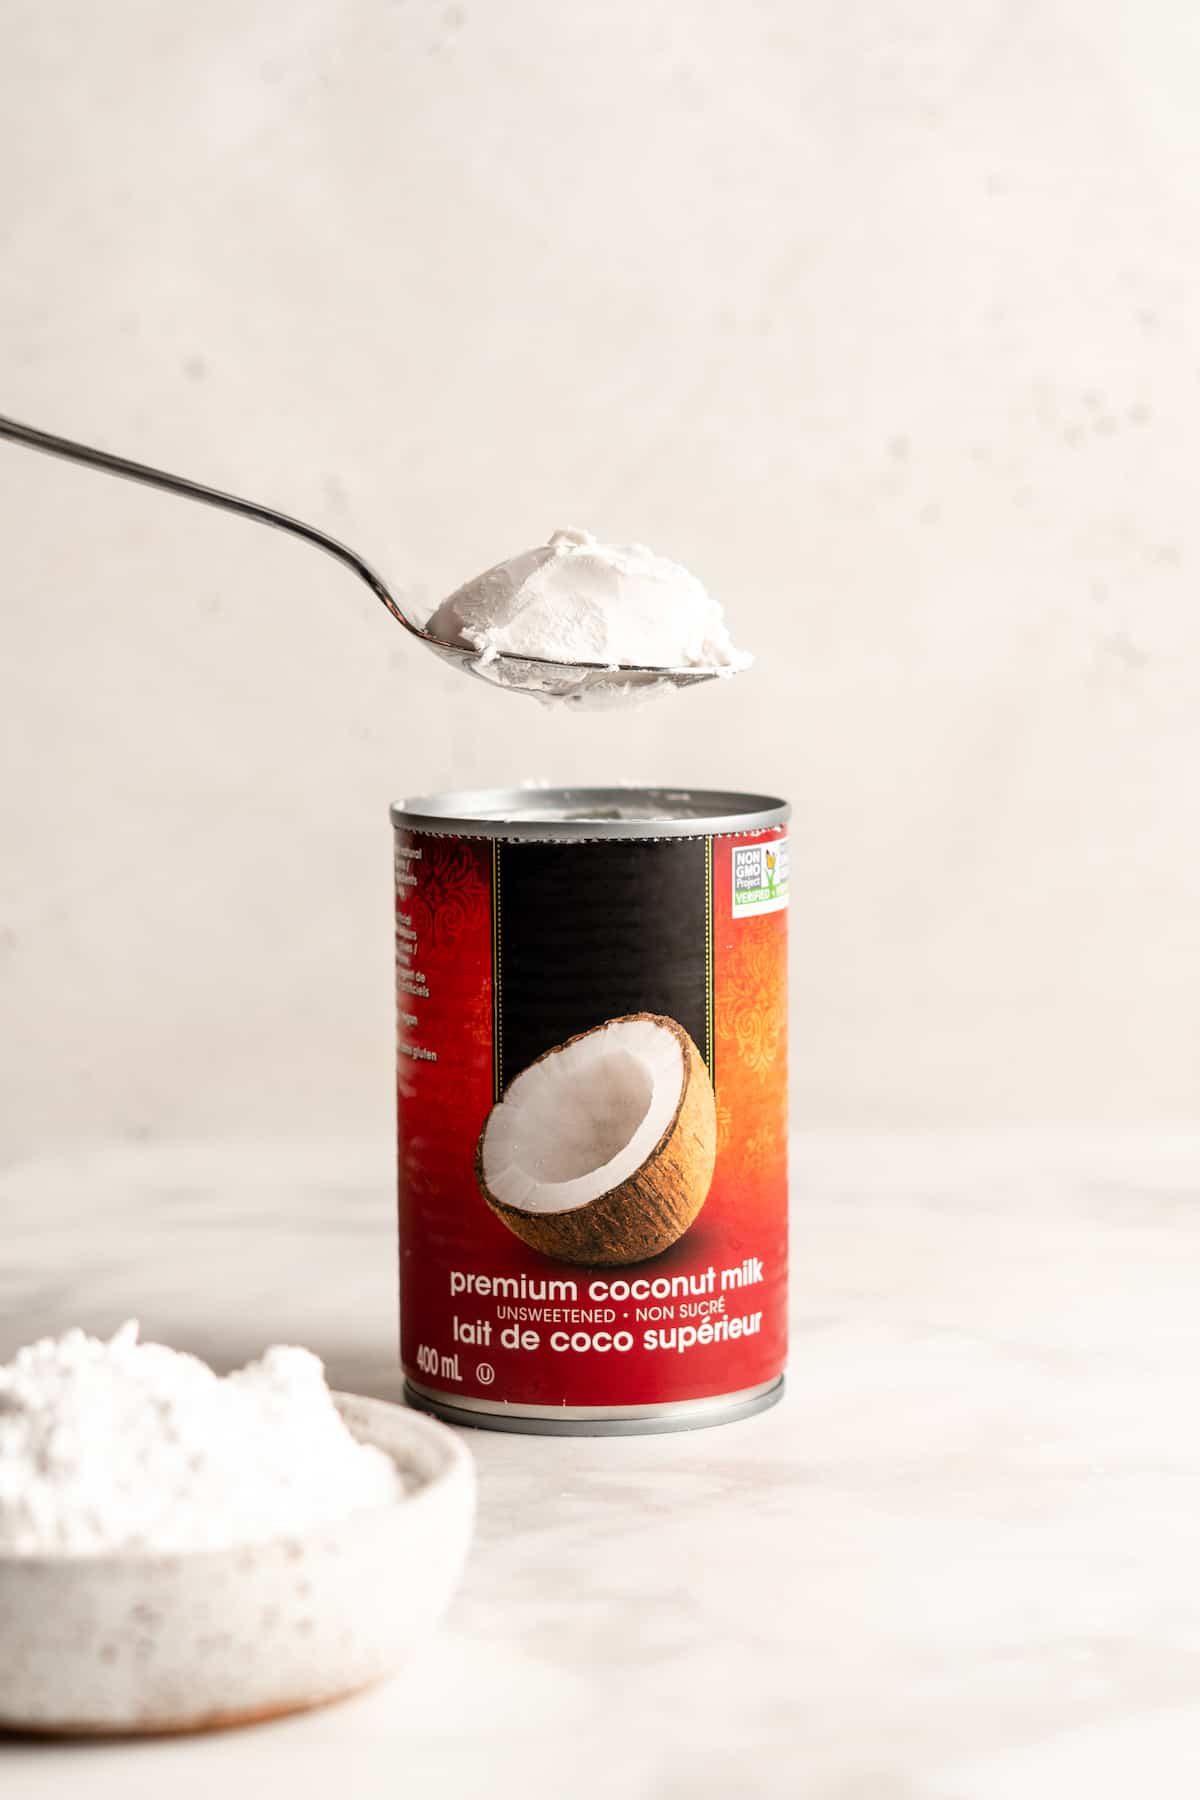 Spoonful of coconut cream being removed from coconut milk